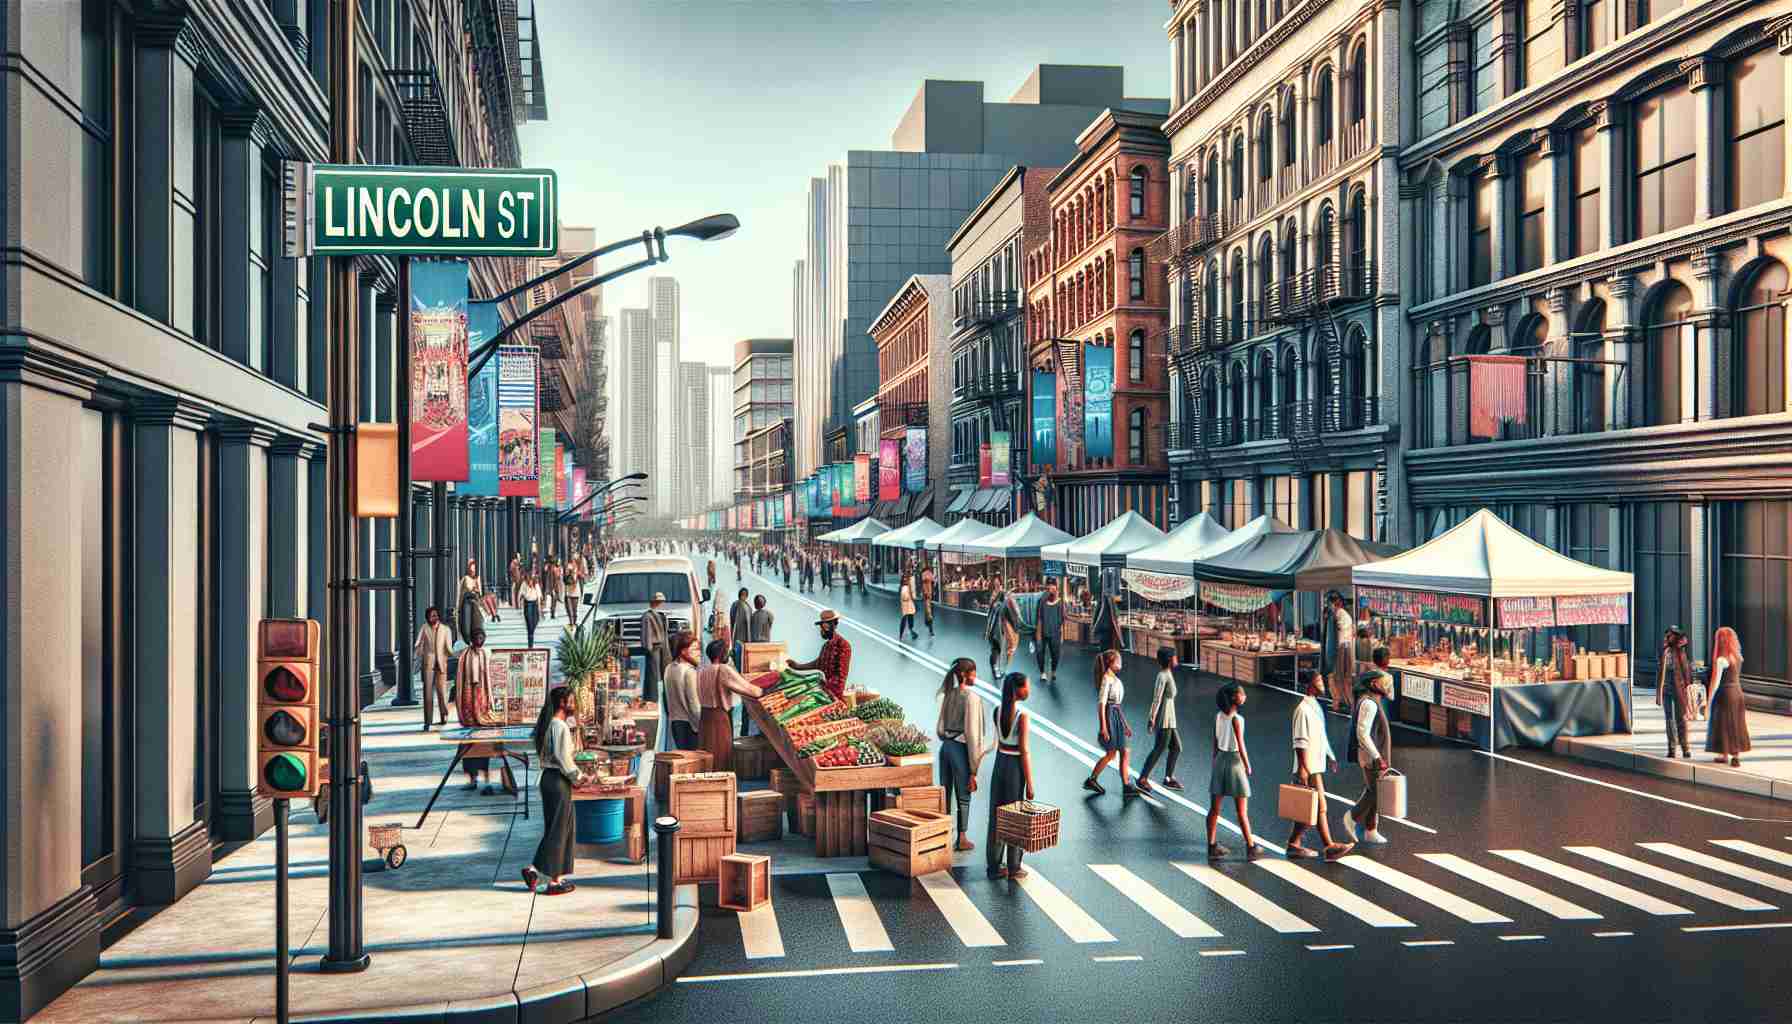 High-resolution, realistic depiction of a vibrant street in an urban setting, signified as 'Lincoln Streets'. Captivate the anticipation of several upcoming events, showcasing banners, posters, and stalls being prepared. People of diverse descents and genders, such as Caucasian females, Asian males, and Hispanic individuals, are actively participating in the preparation, with a sense of anticipation and excitement. The elements of the upcoming events can include cultural exhibitions, food festivals, or local music performances, reflecting the community's diversity and unity.